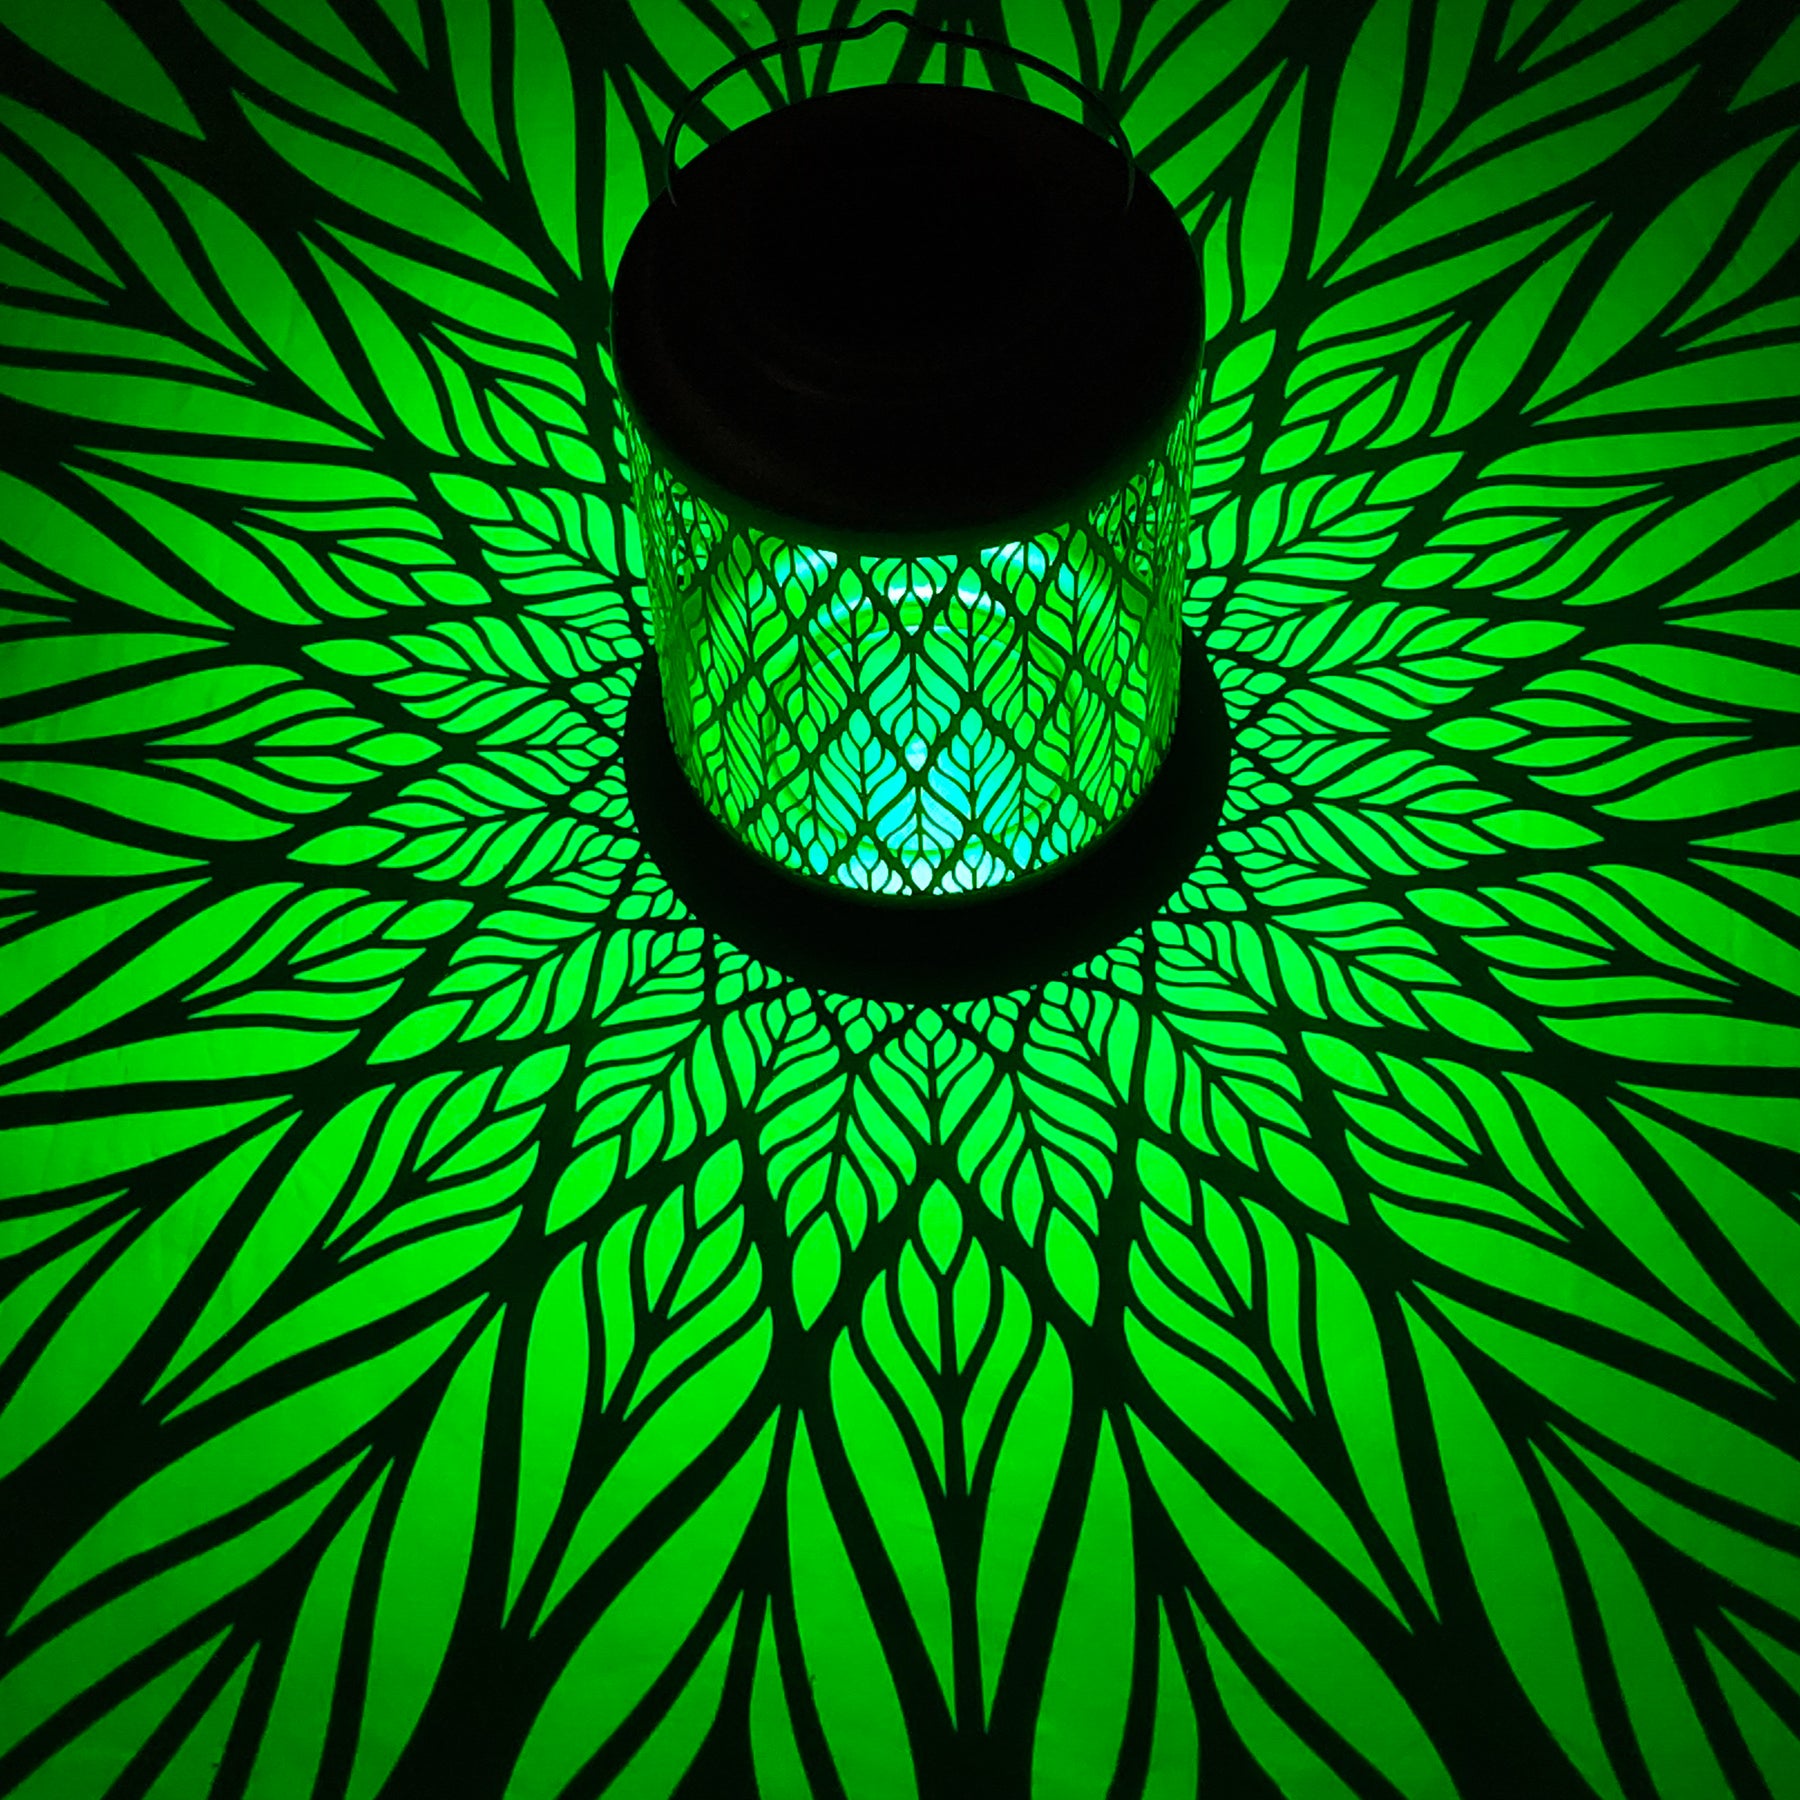 Bliss Outdoors 12-inch Tall Hanging and Tabletop Decorative Solar LED Lantern with Unique Diamond Leaf Design turned on and creating a cool pattern of green light on the surface around it.